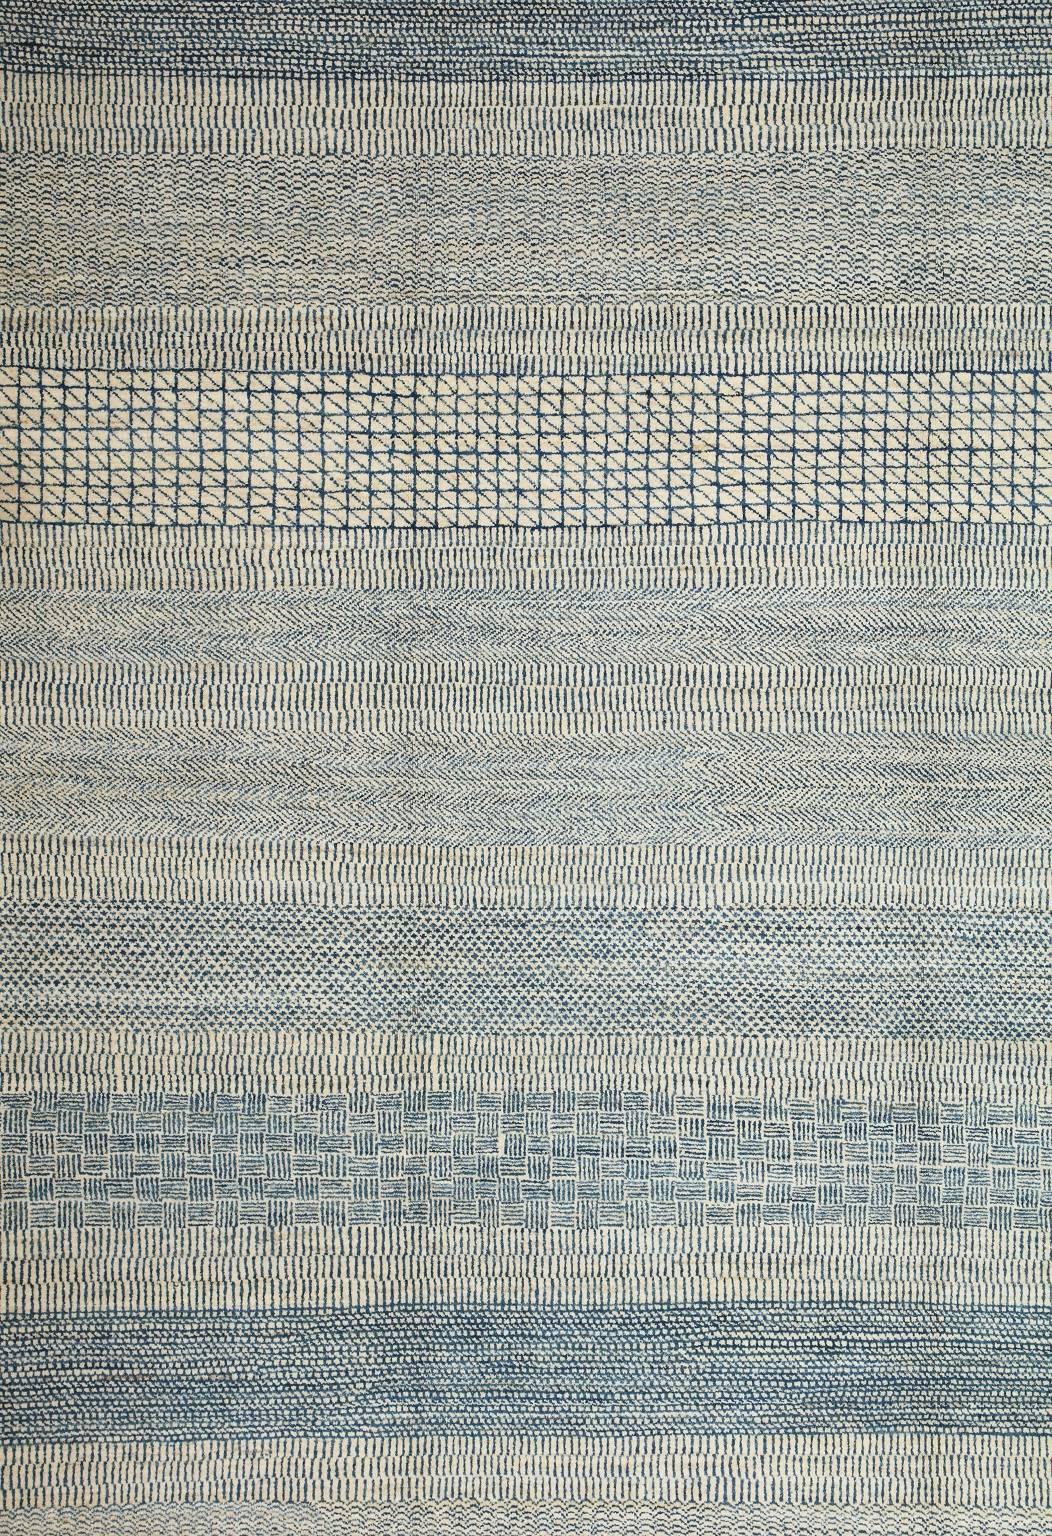 This 8’ x 10’ Orley Shabahang signature “Rain” carpet showcases a modern design in a hand knotted Persian weave. This carpet, from the Orley Shabahang Rain collection, features a simple pattern made from pure handspun wool and organic dyes that